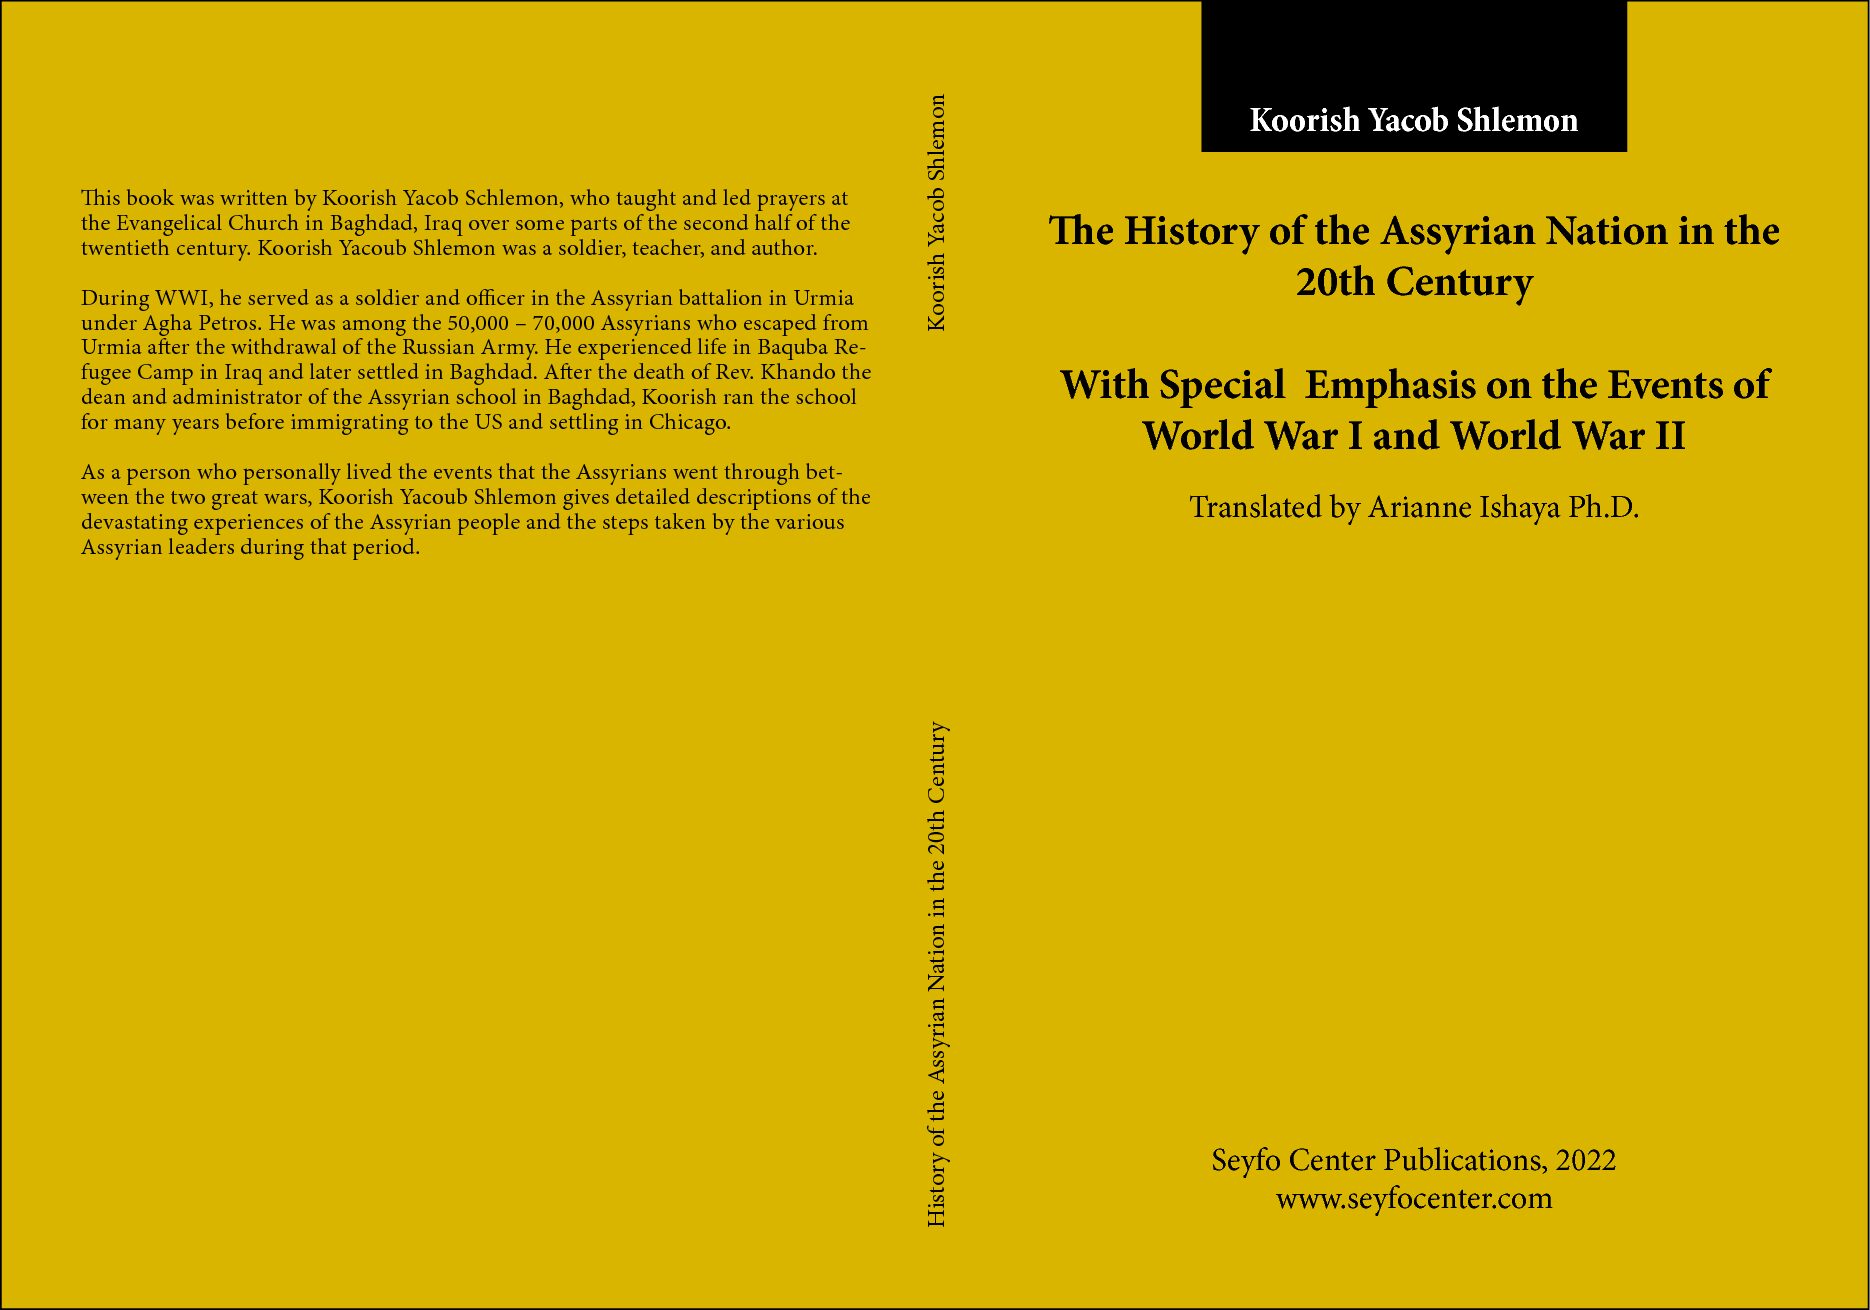 A new book: The History of the Assyrian Nation in the Twentieth Century